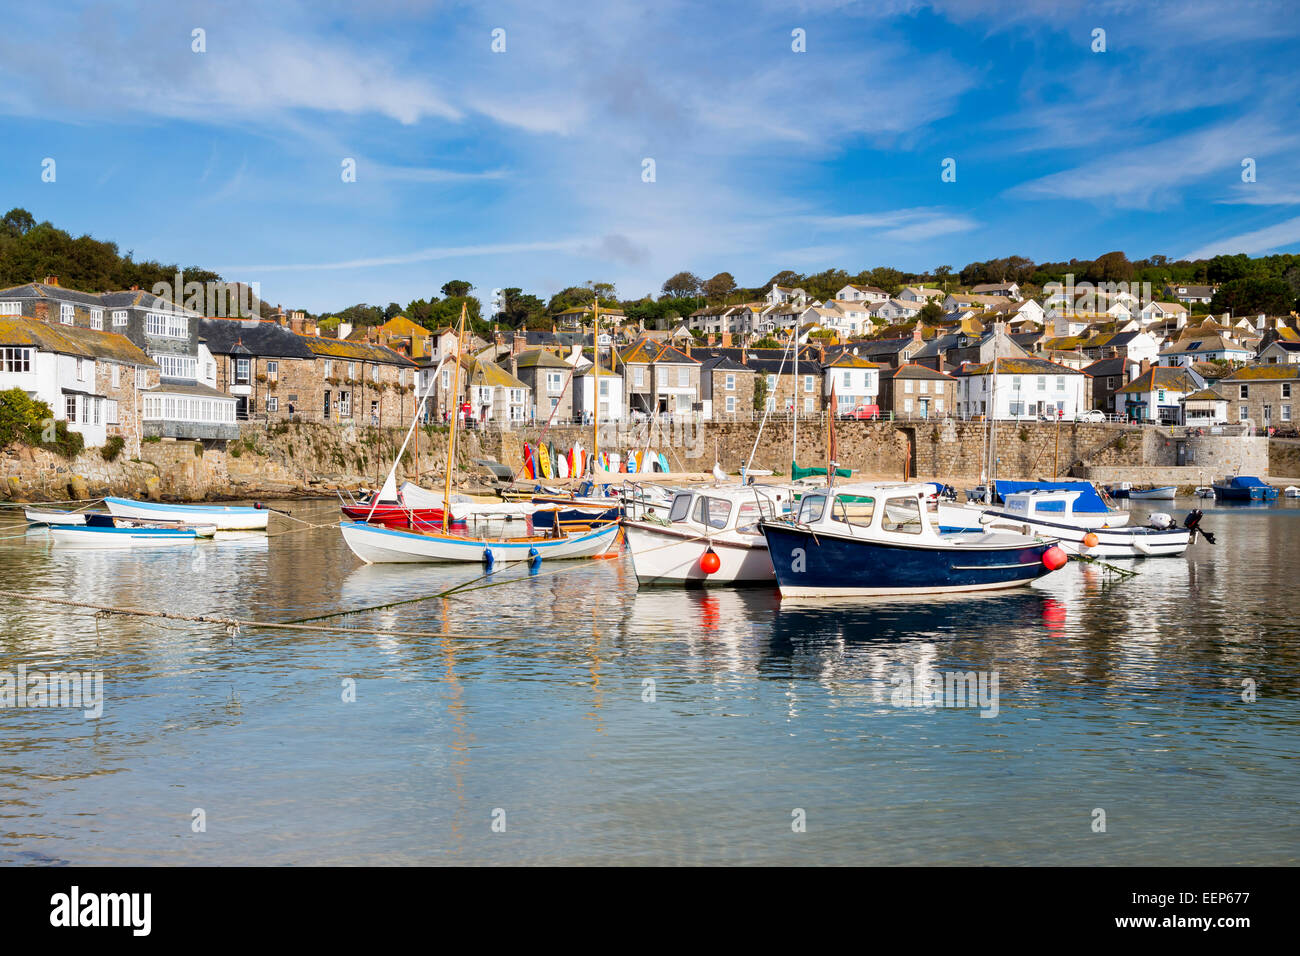 Beautiful summers day at Mousehole Harbour near Penzance Cornwall England UK Europe Stock Photo